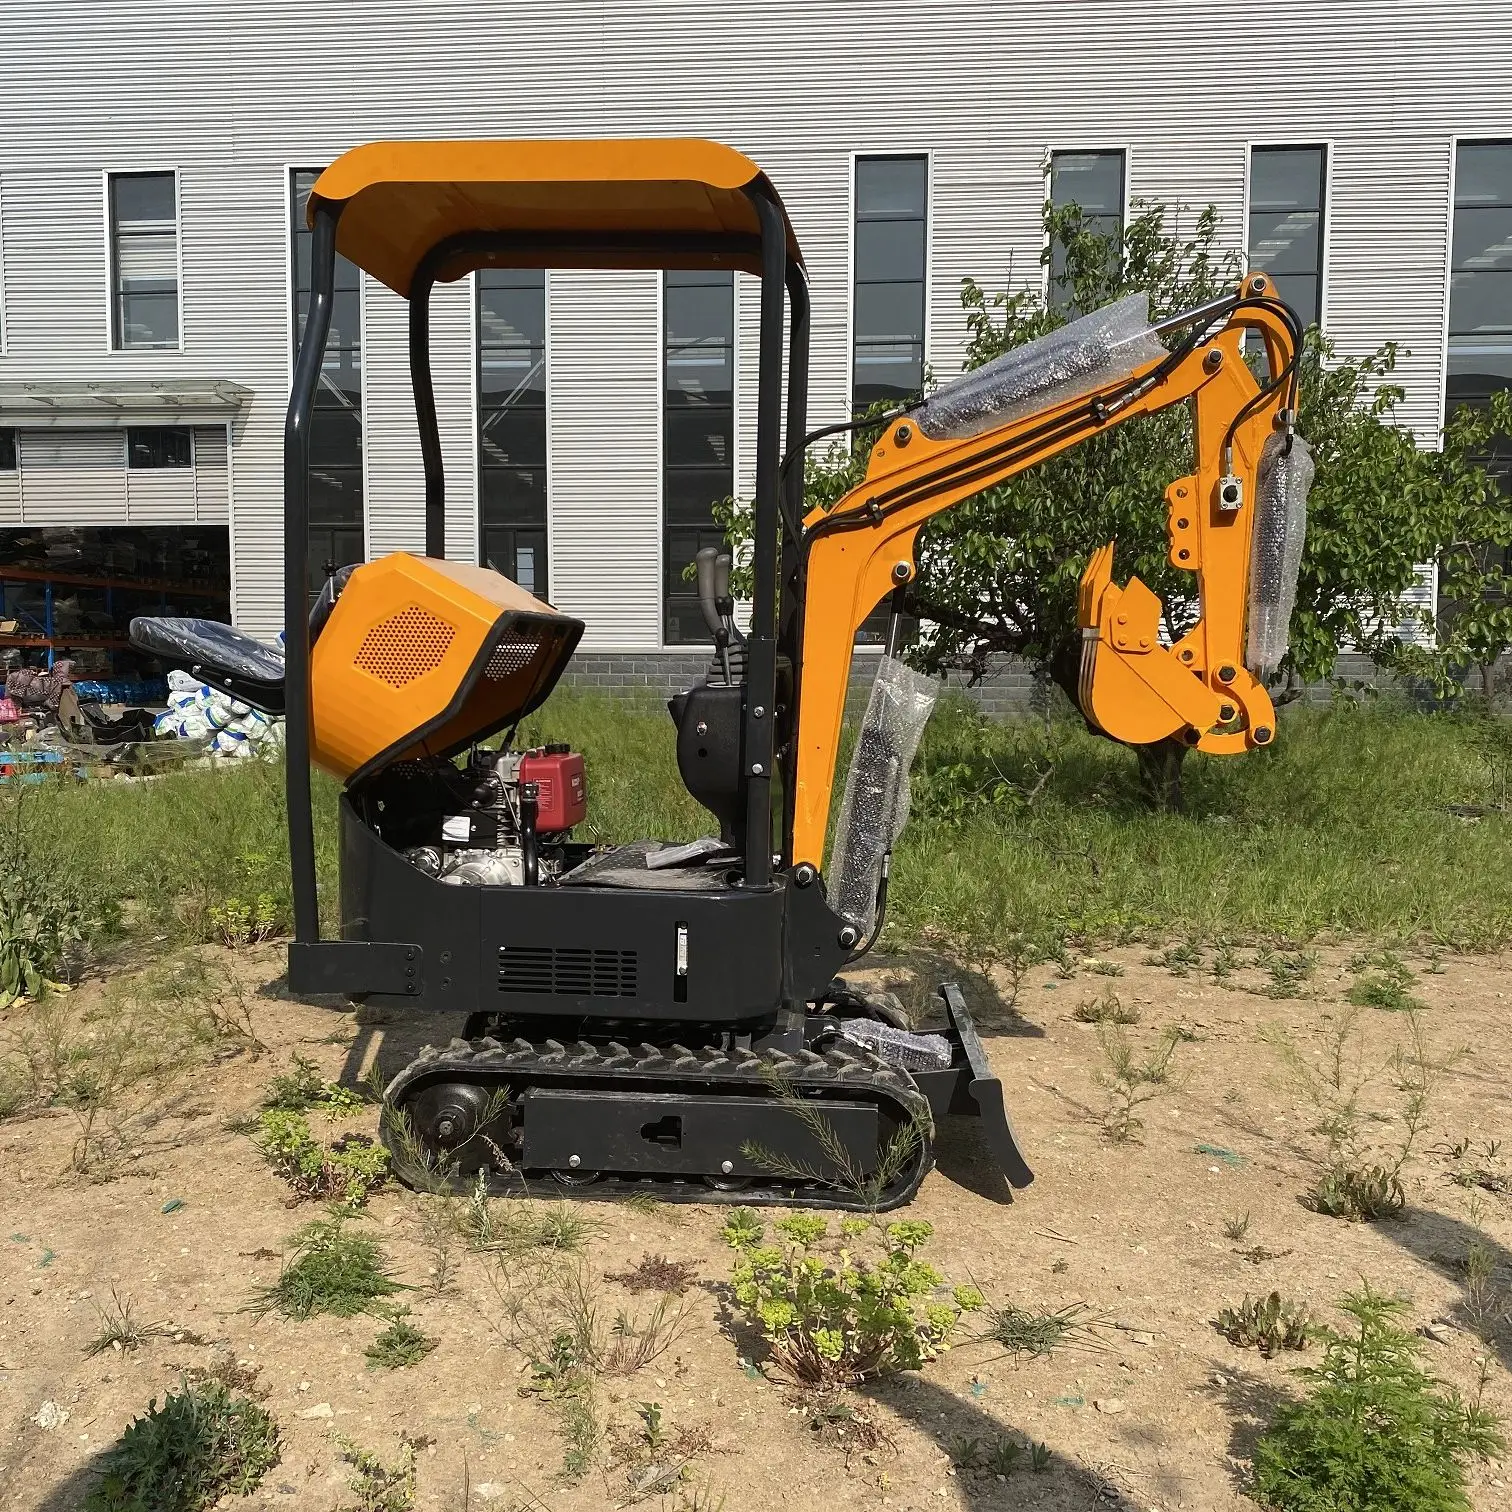 Europe customer EURO engine HT10 mini excavator digger June sourcing festival wholesale 1 ton small bagger in garden